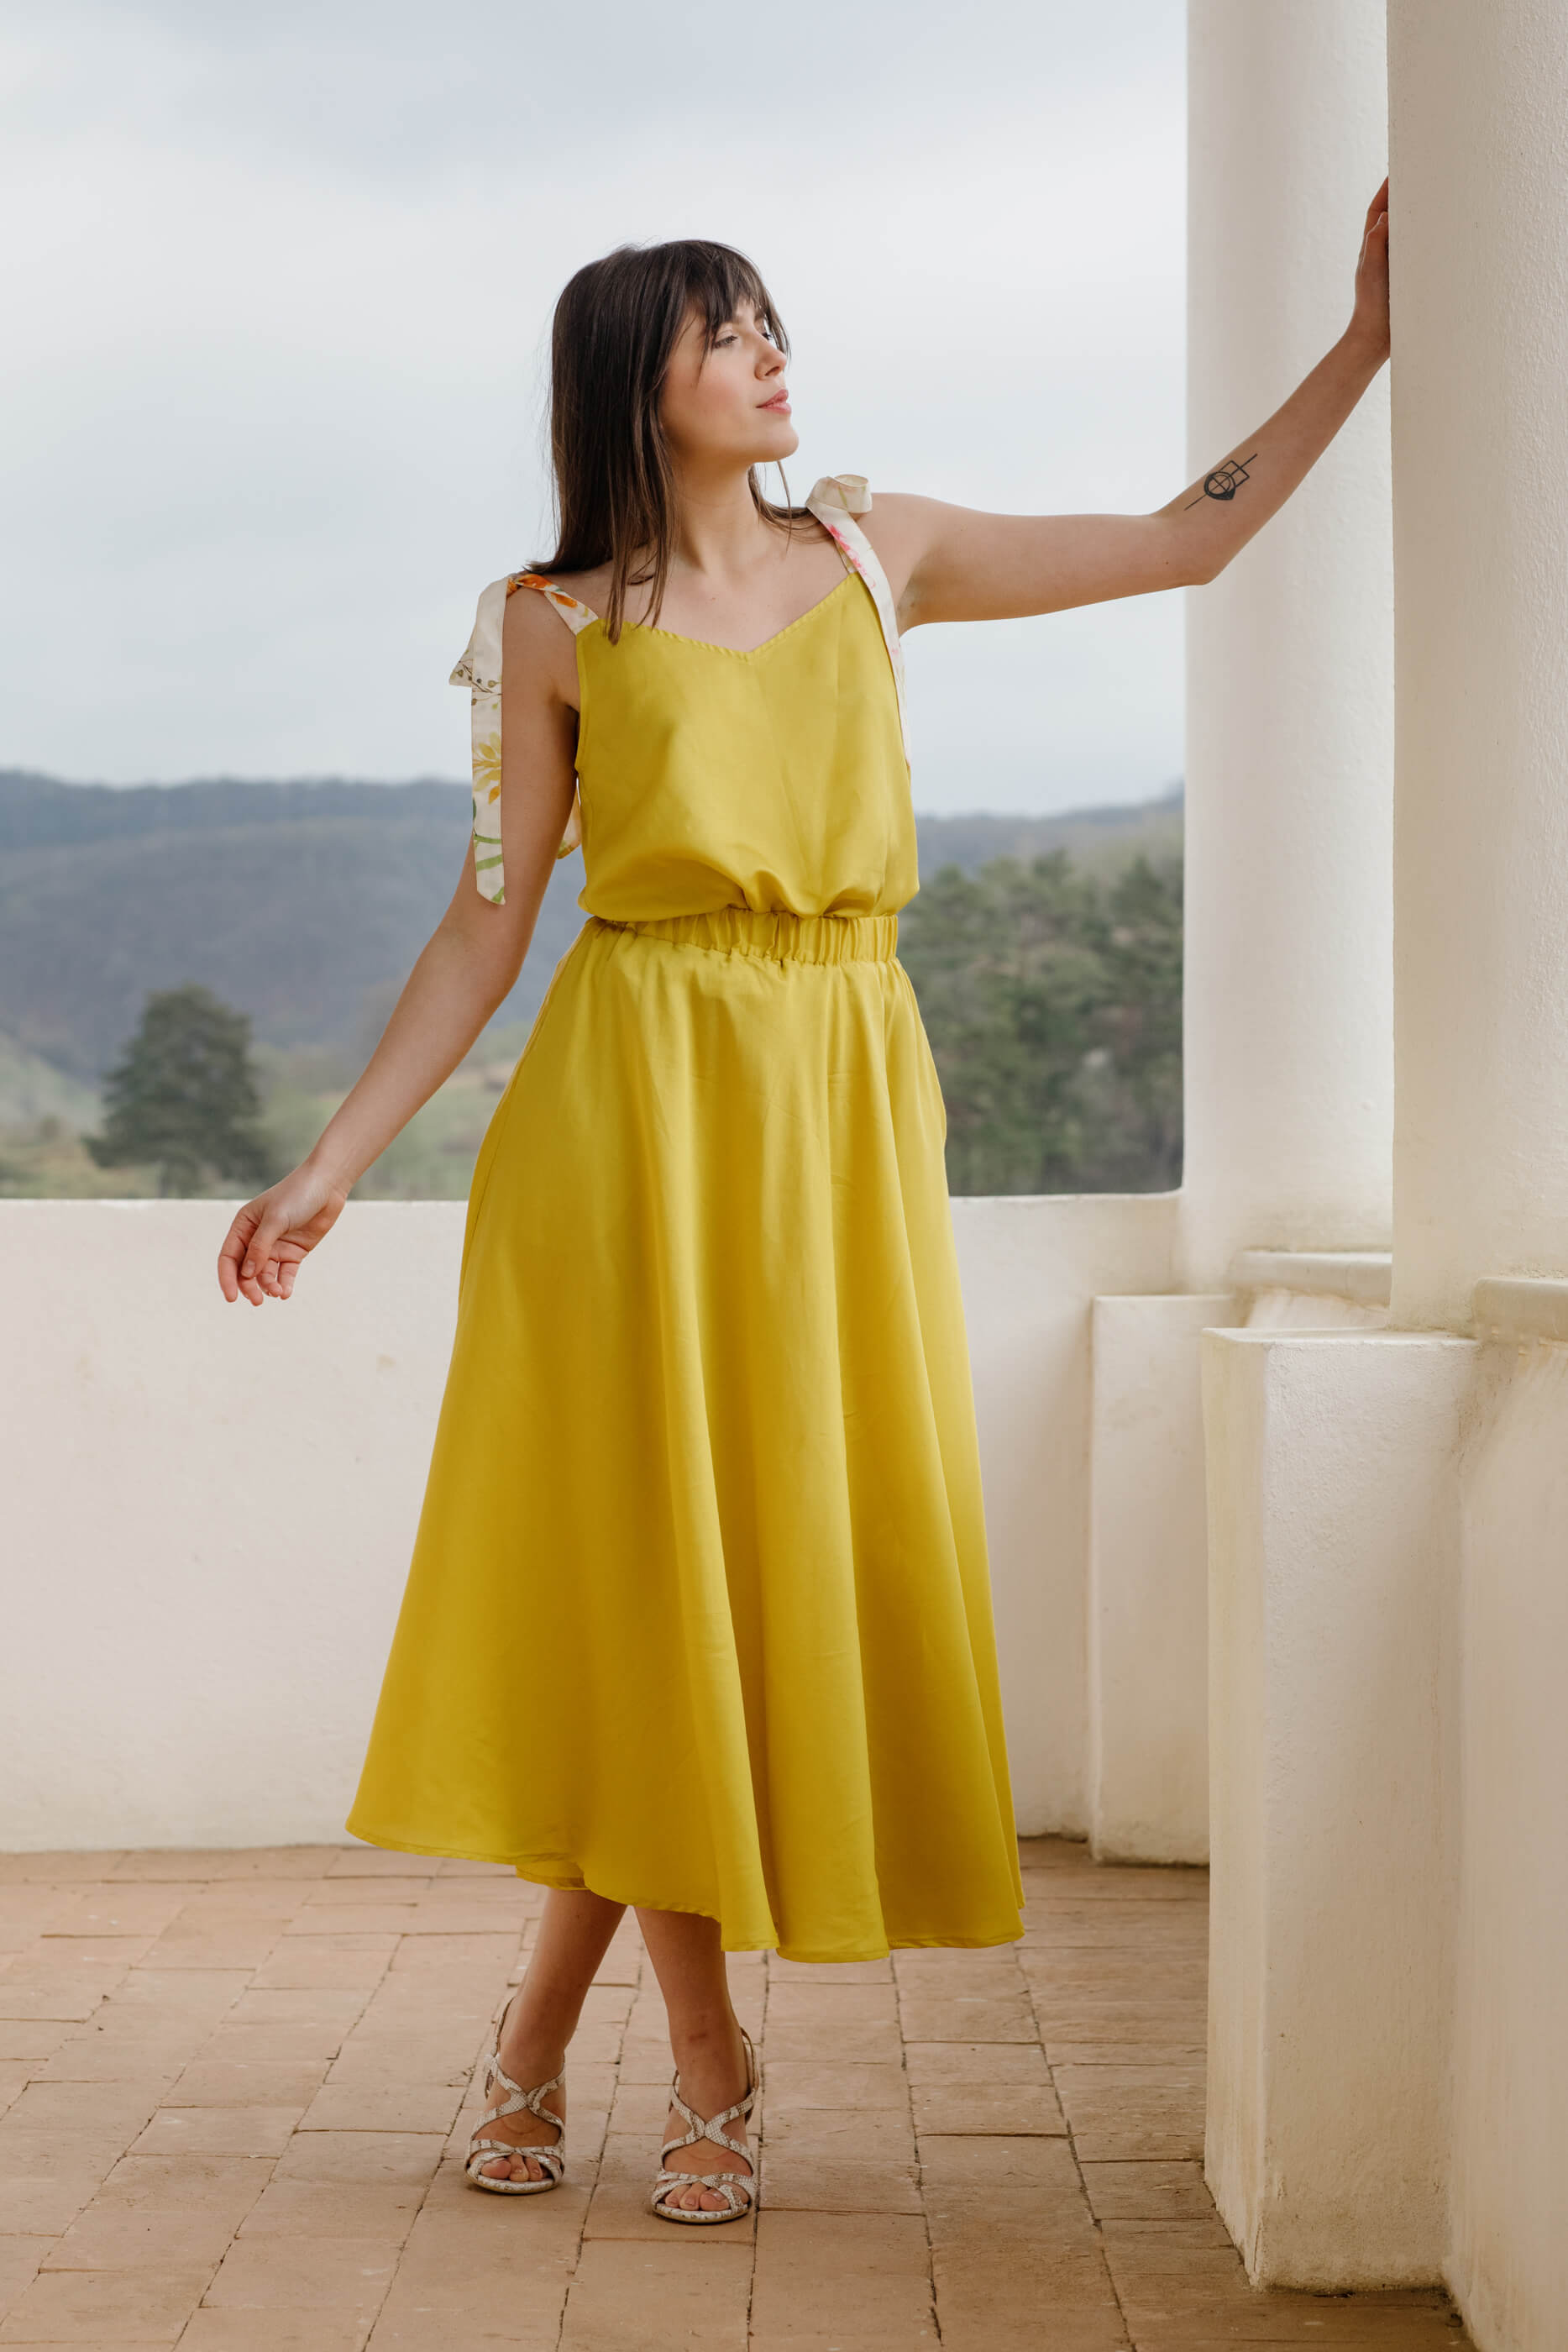 Long and Airy Skirt in Silk and Organic Cotton